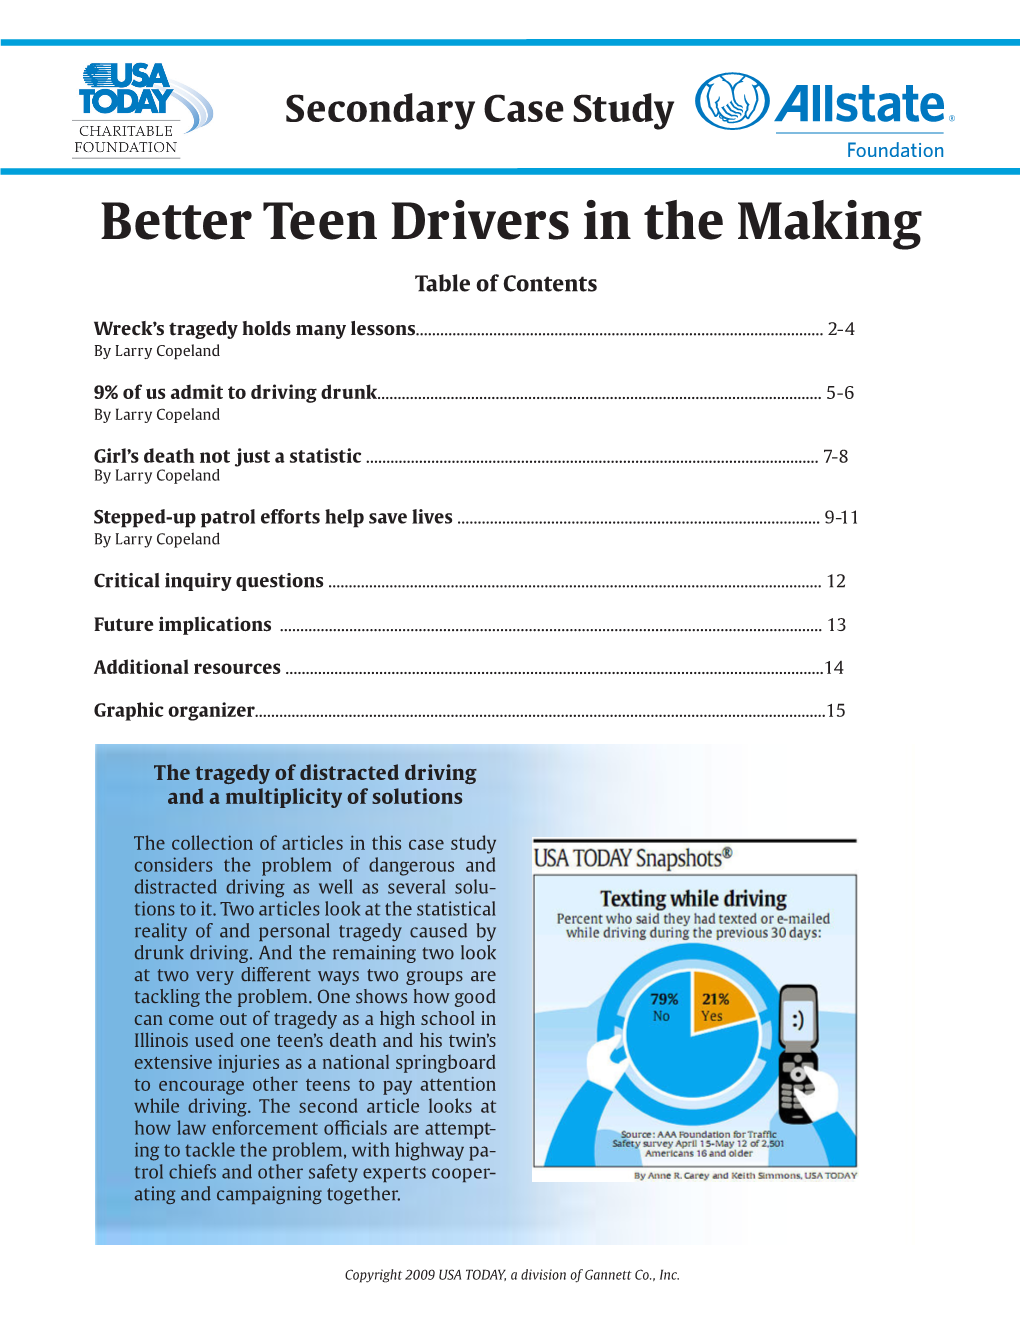 Better Teen Drivers in the Making